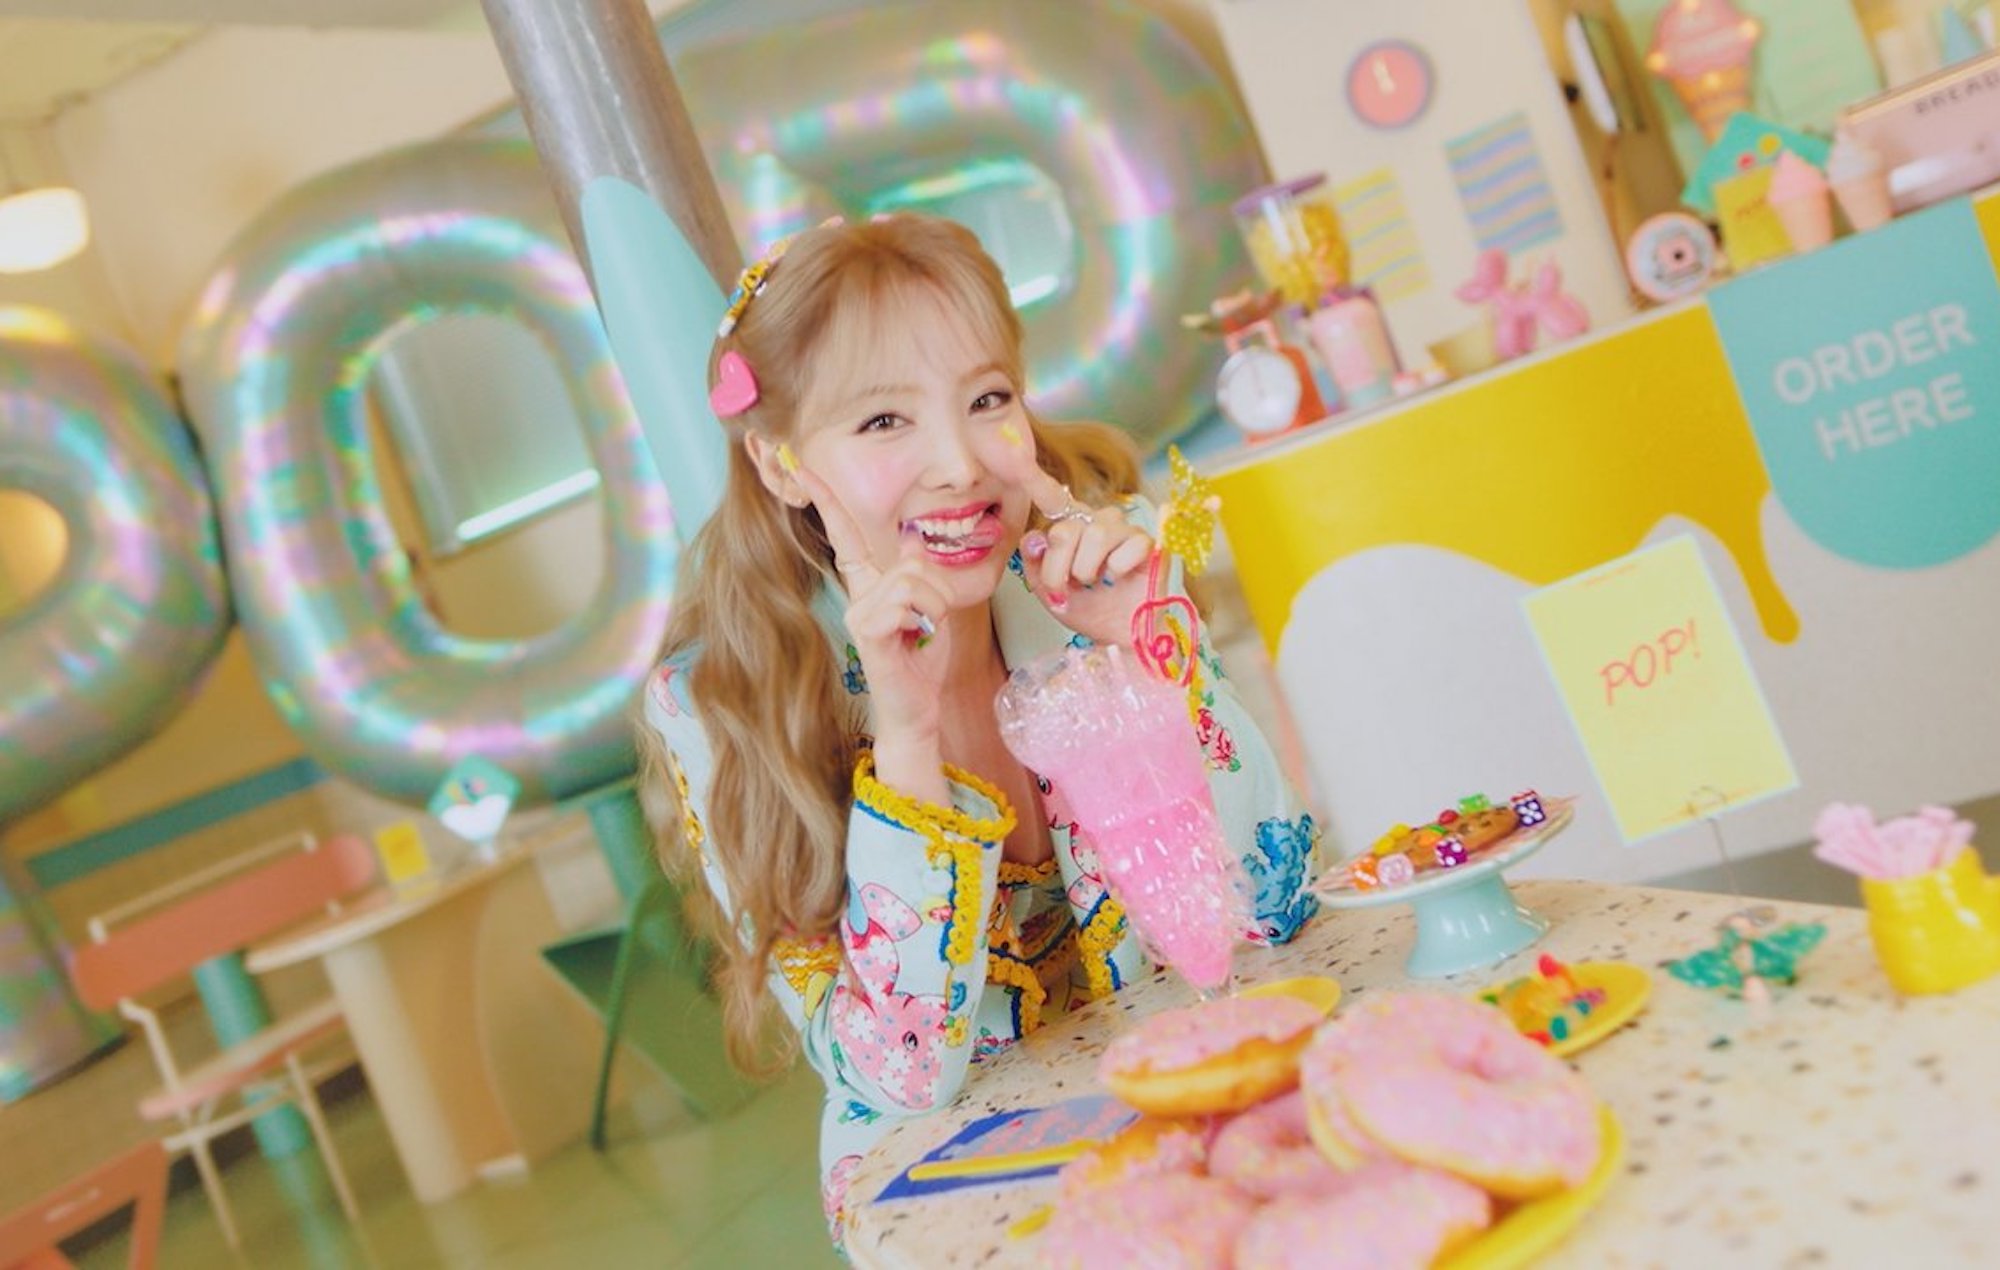 [Review] TWICE’s Nayeon makes a promising solo debut with “POP!”